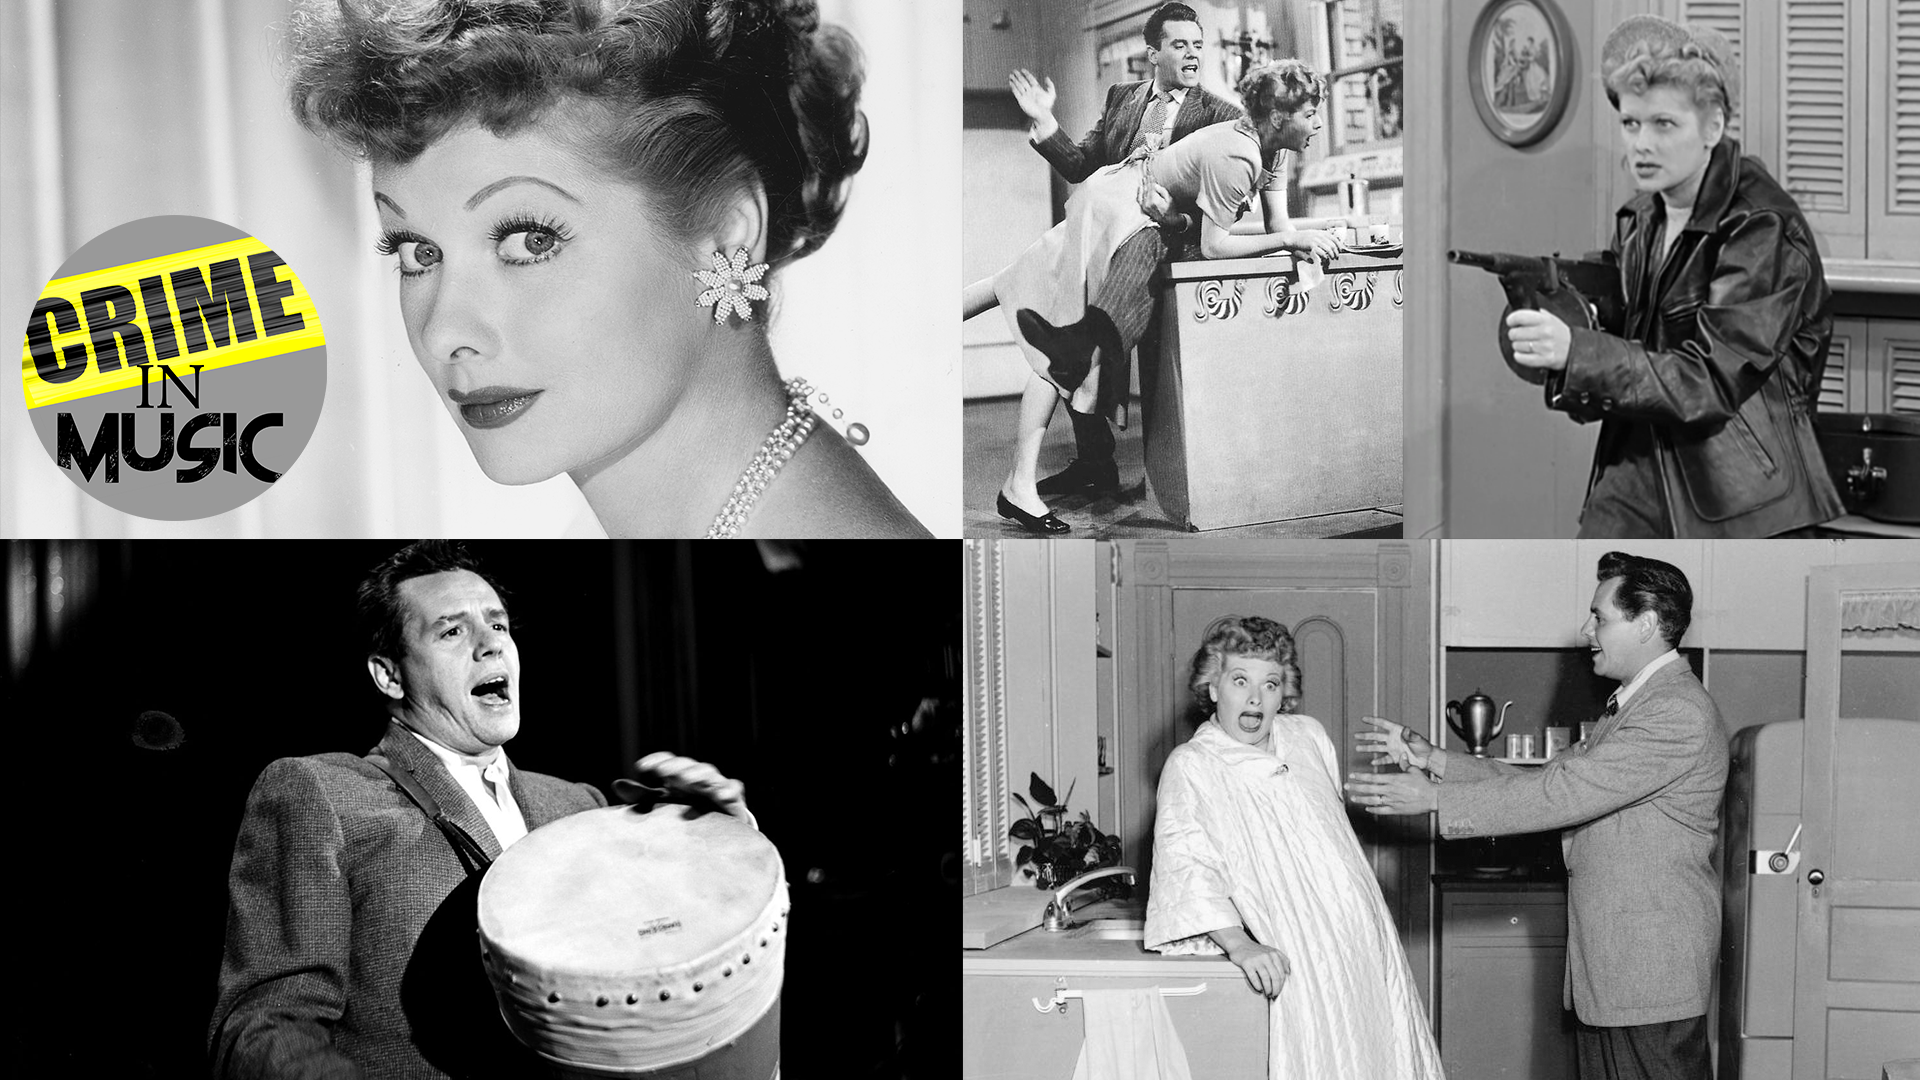 photo collage of Lucille Ball and Desi Arnaz, comedian, Musician, tv sitcom royality